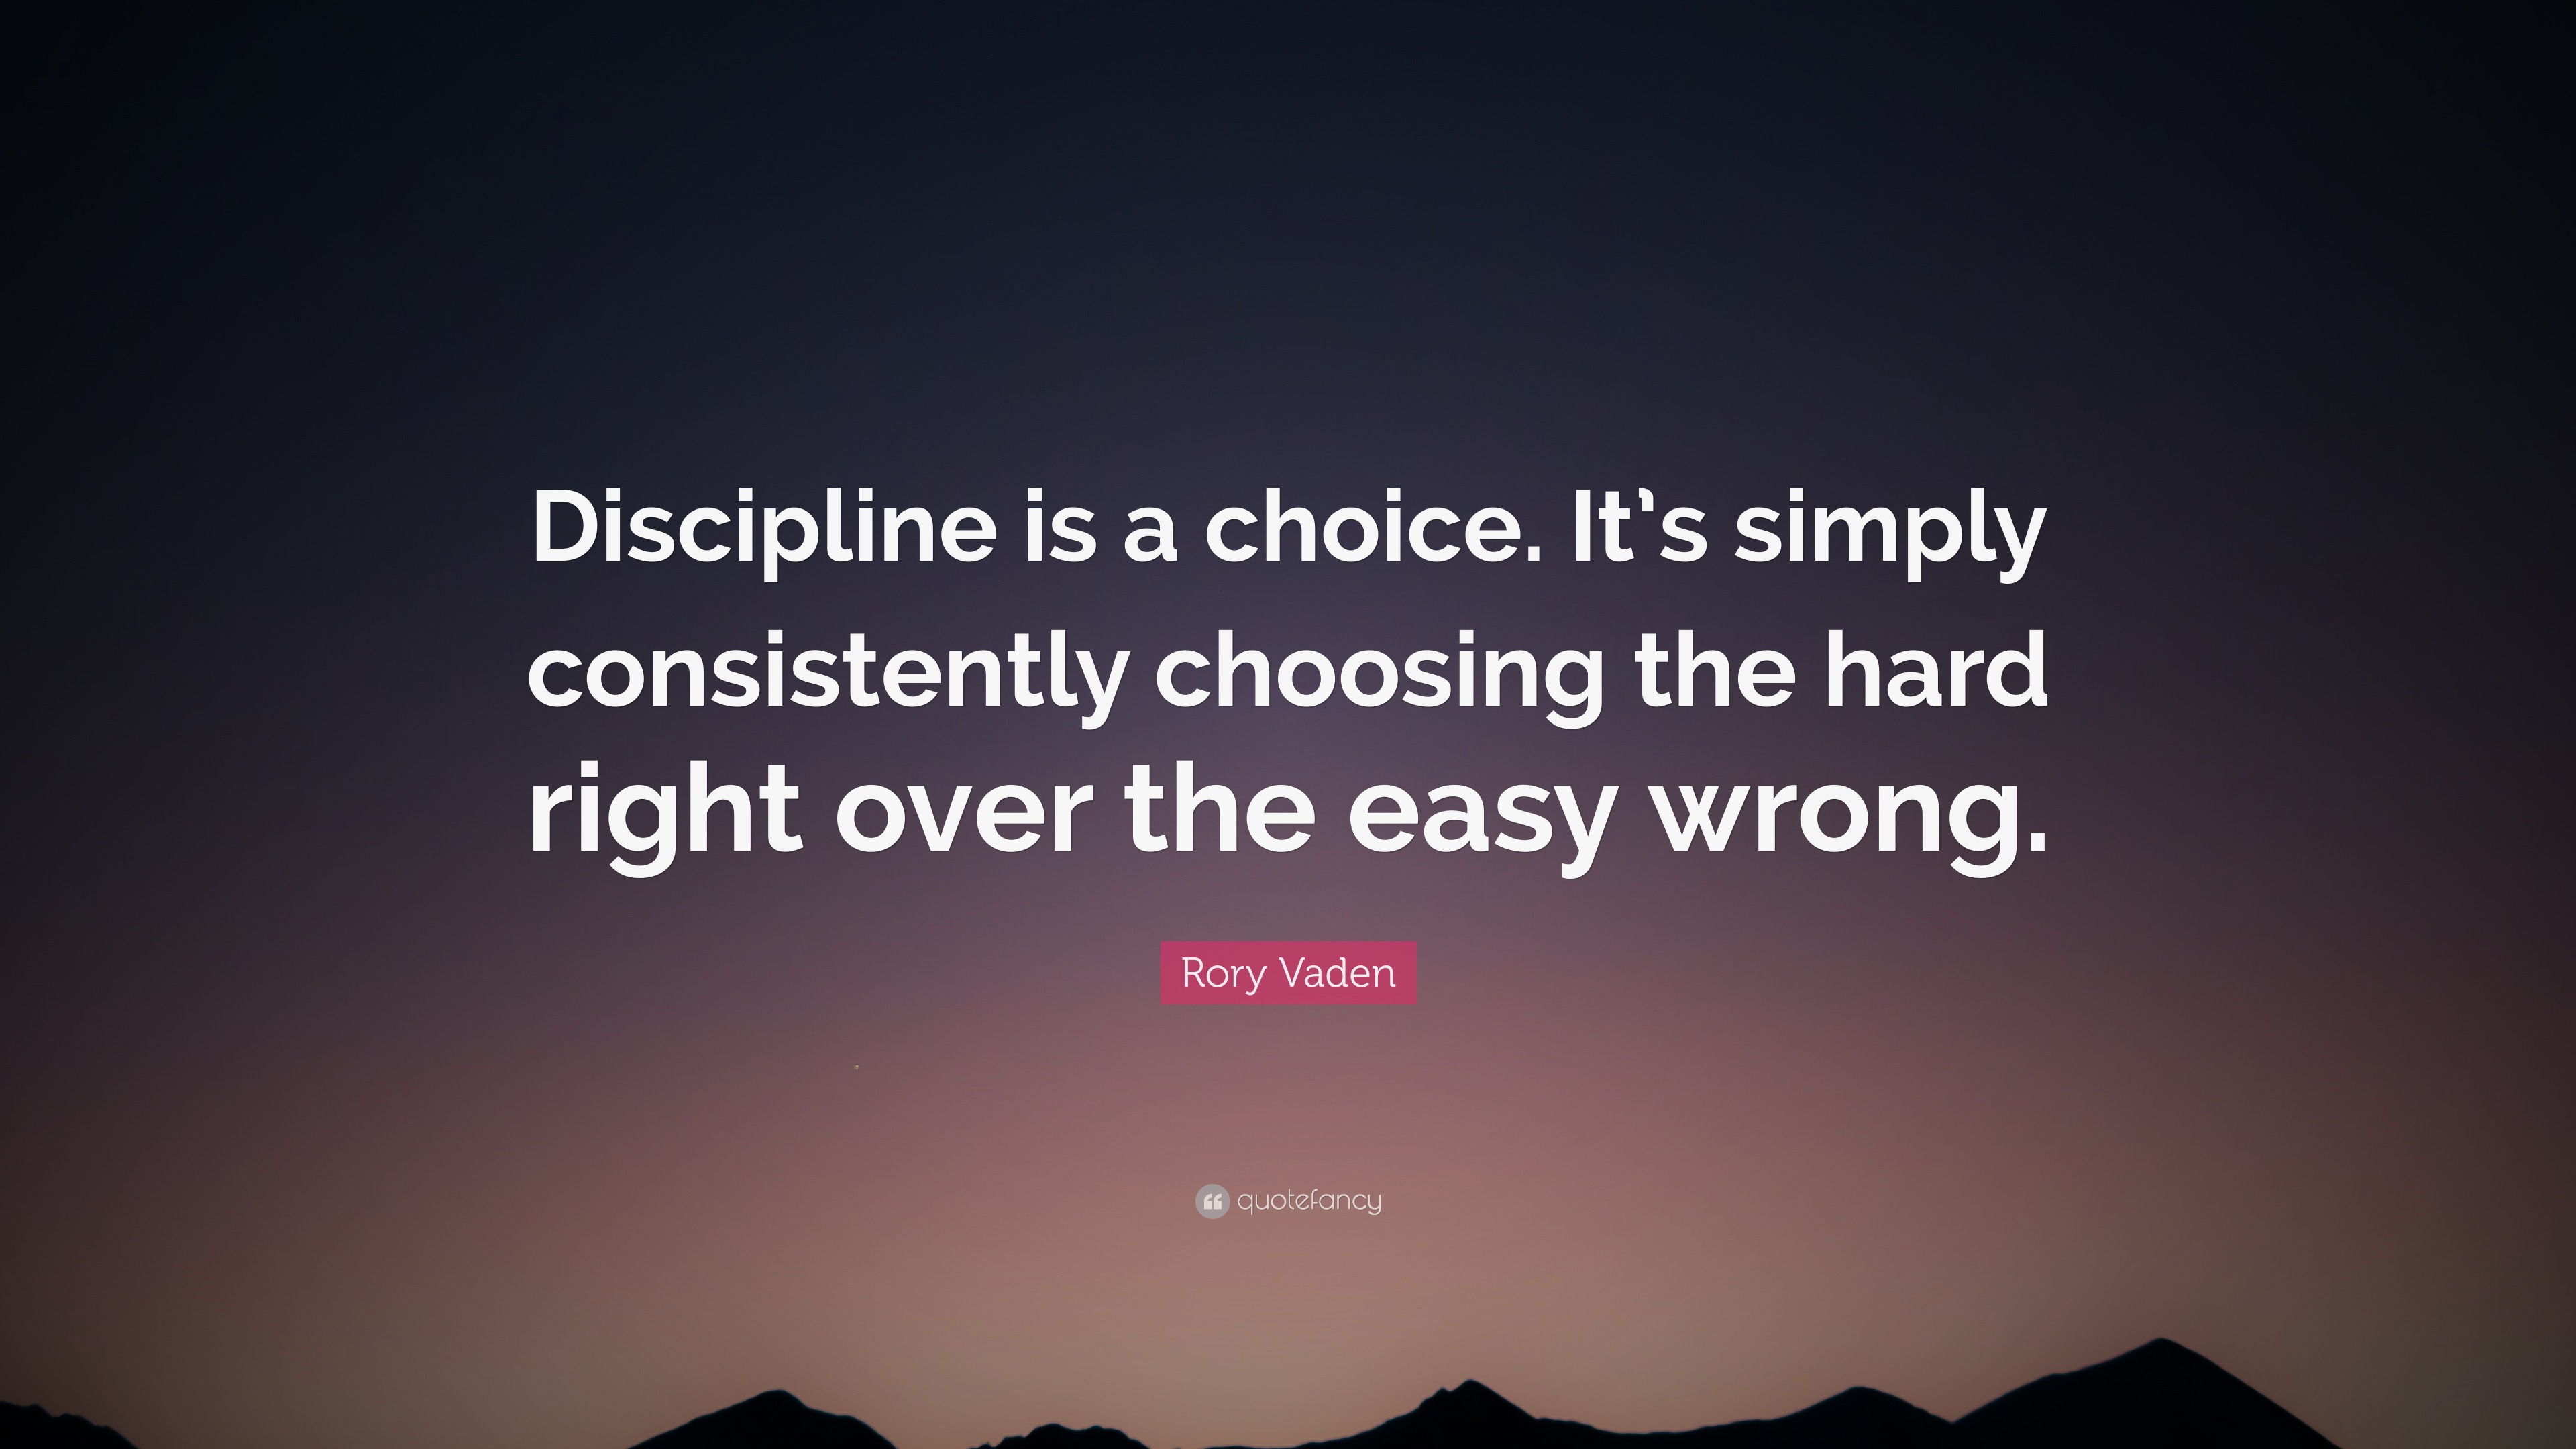 Rory Vaden Quote: “Discipline is a choice. It’s simply consistently ...